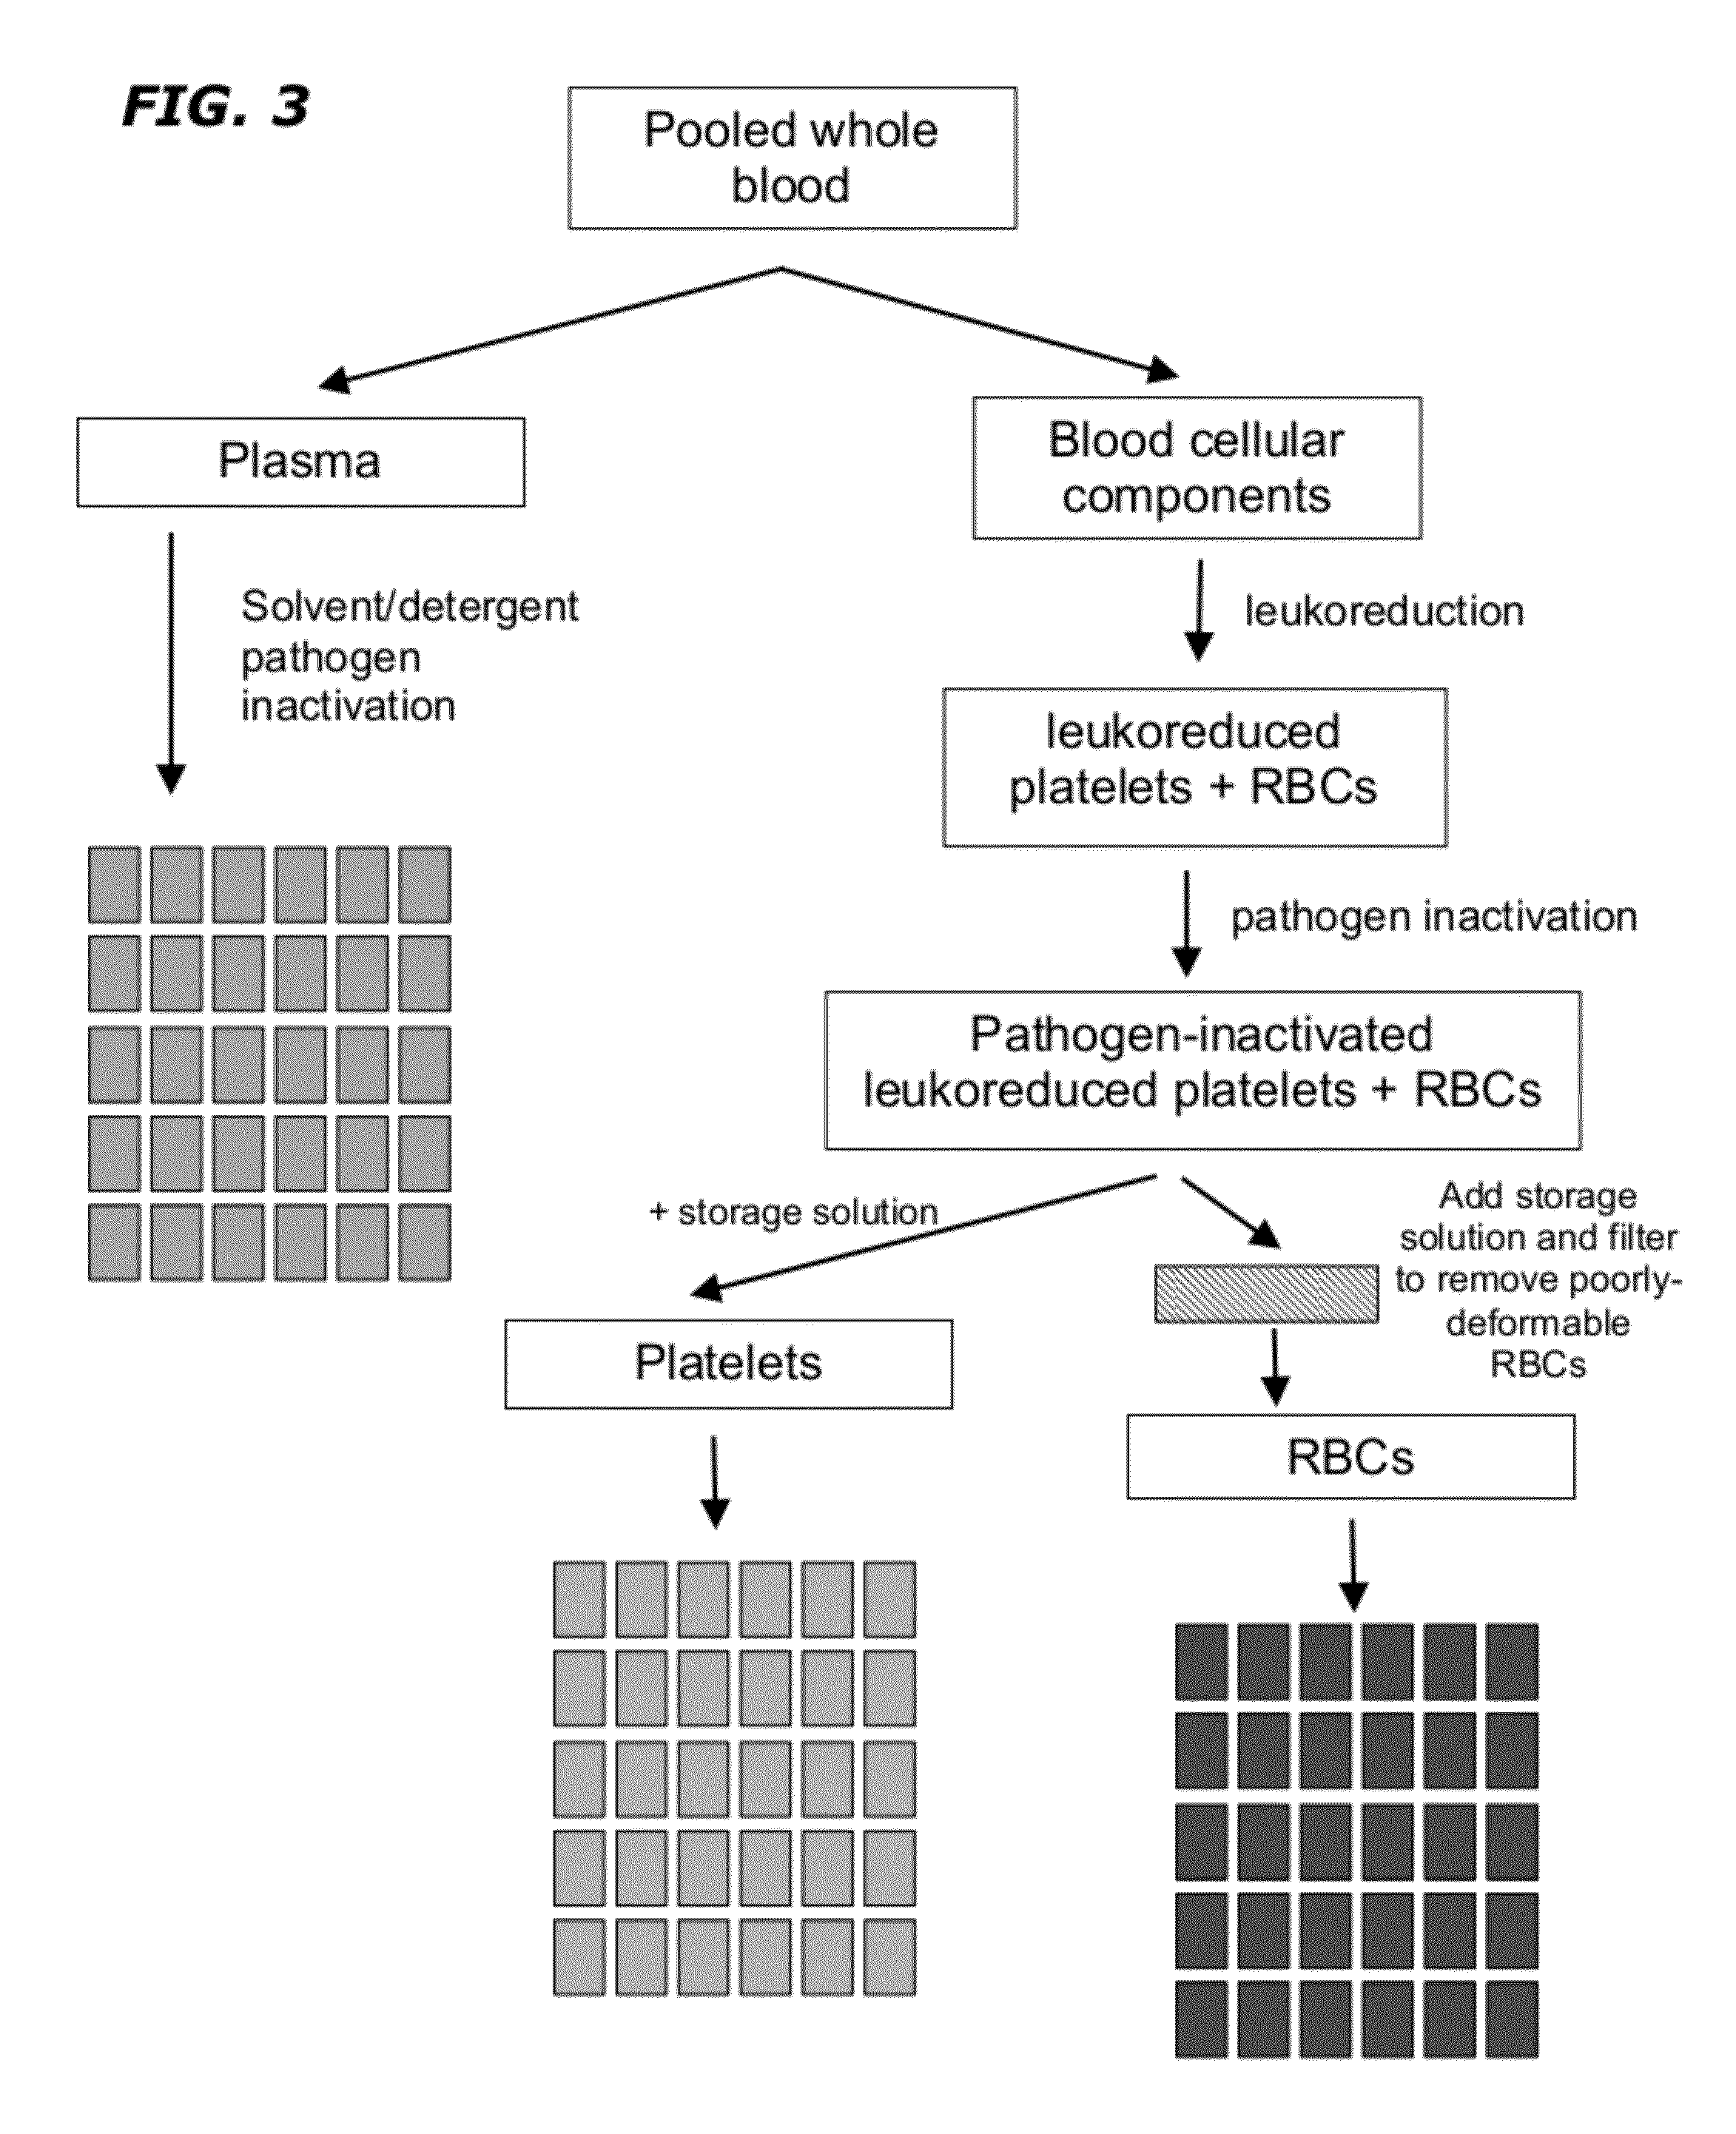 Method of Blood Pooling and Storage